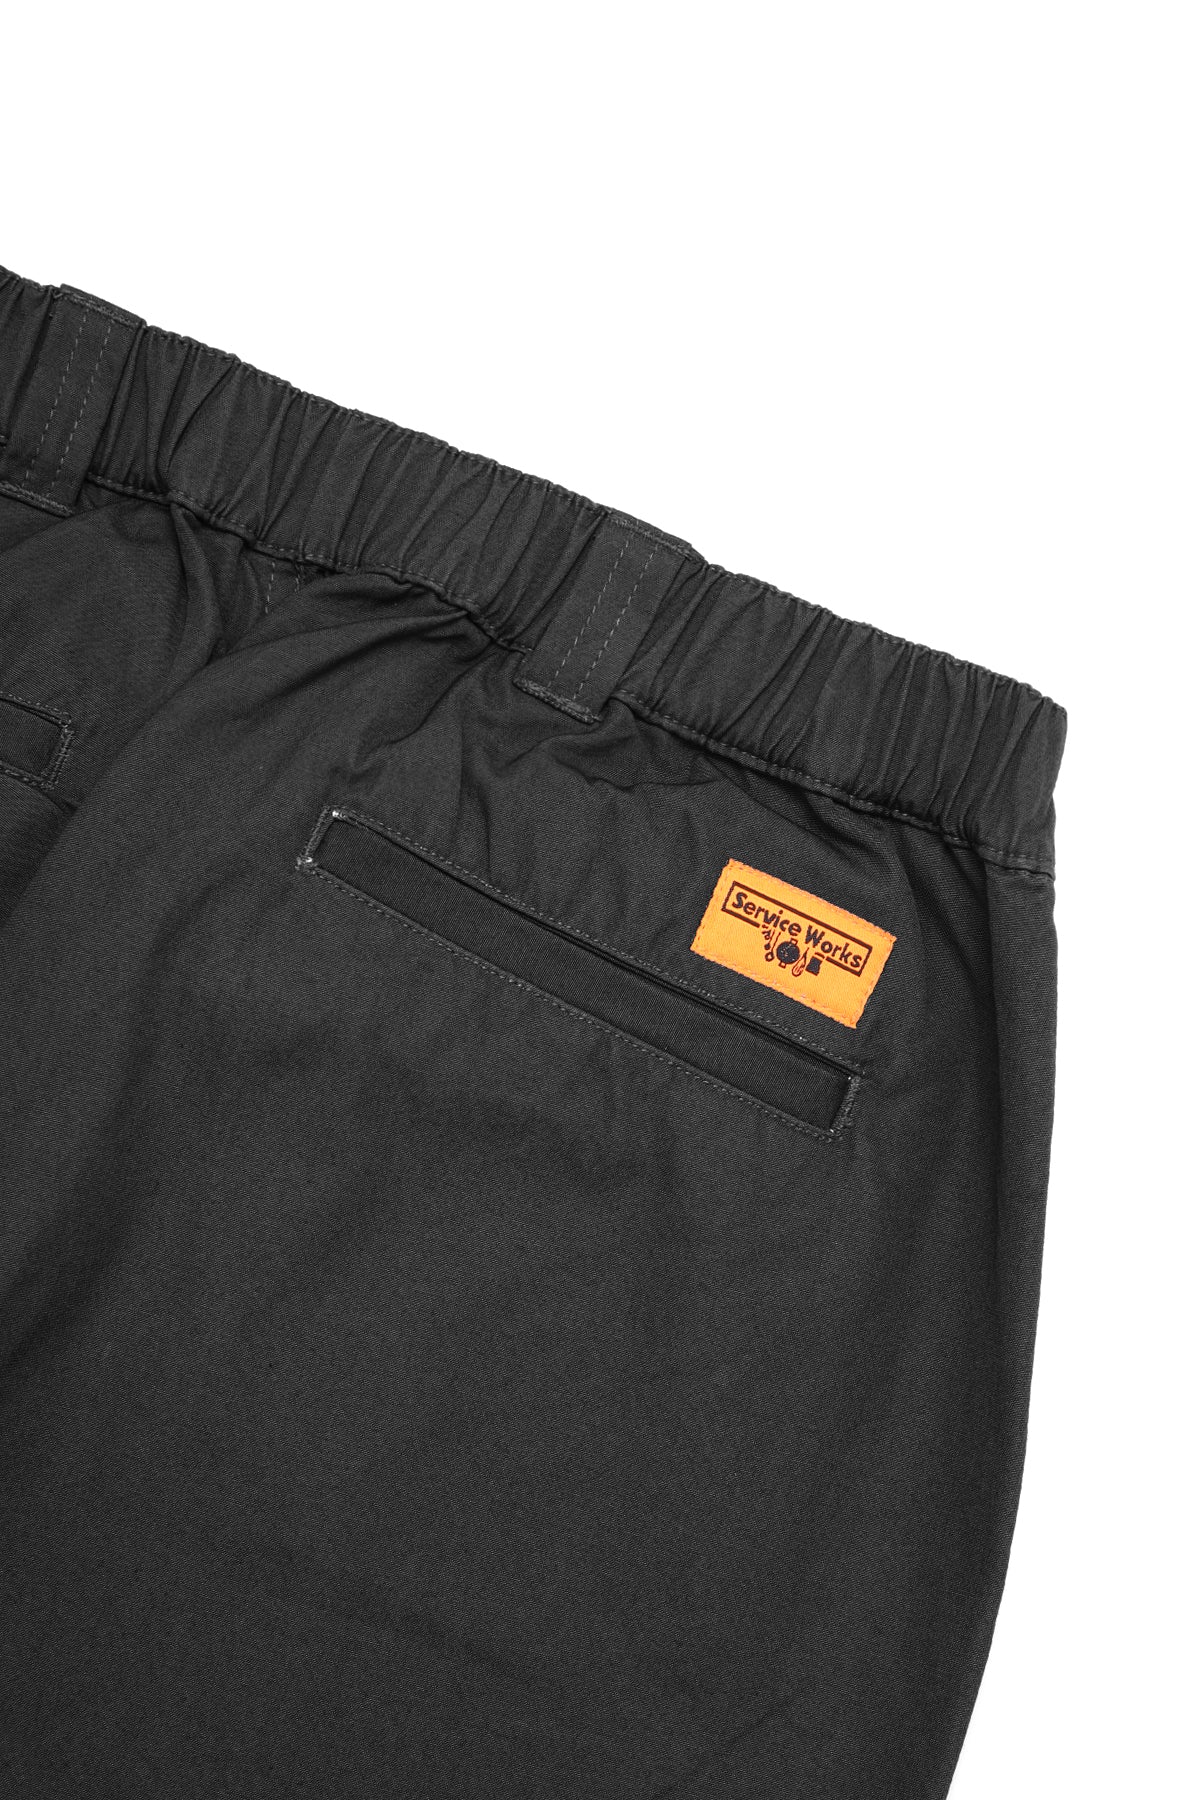 Service Works Twill Waiter Pant